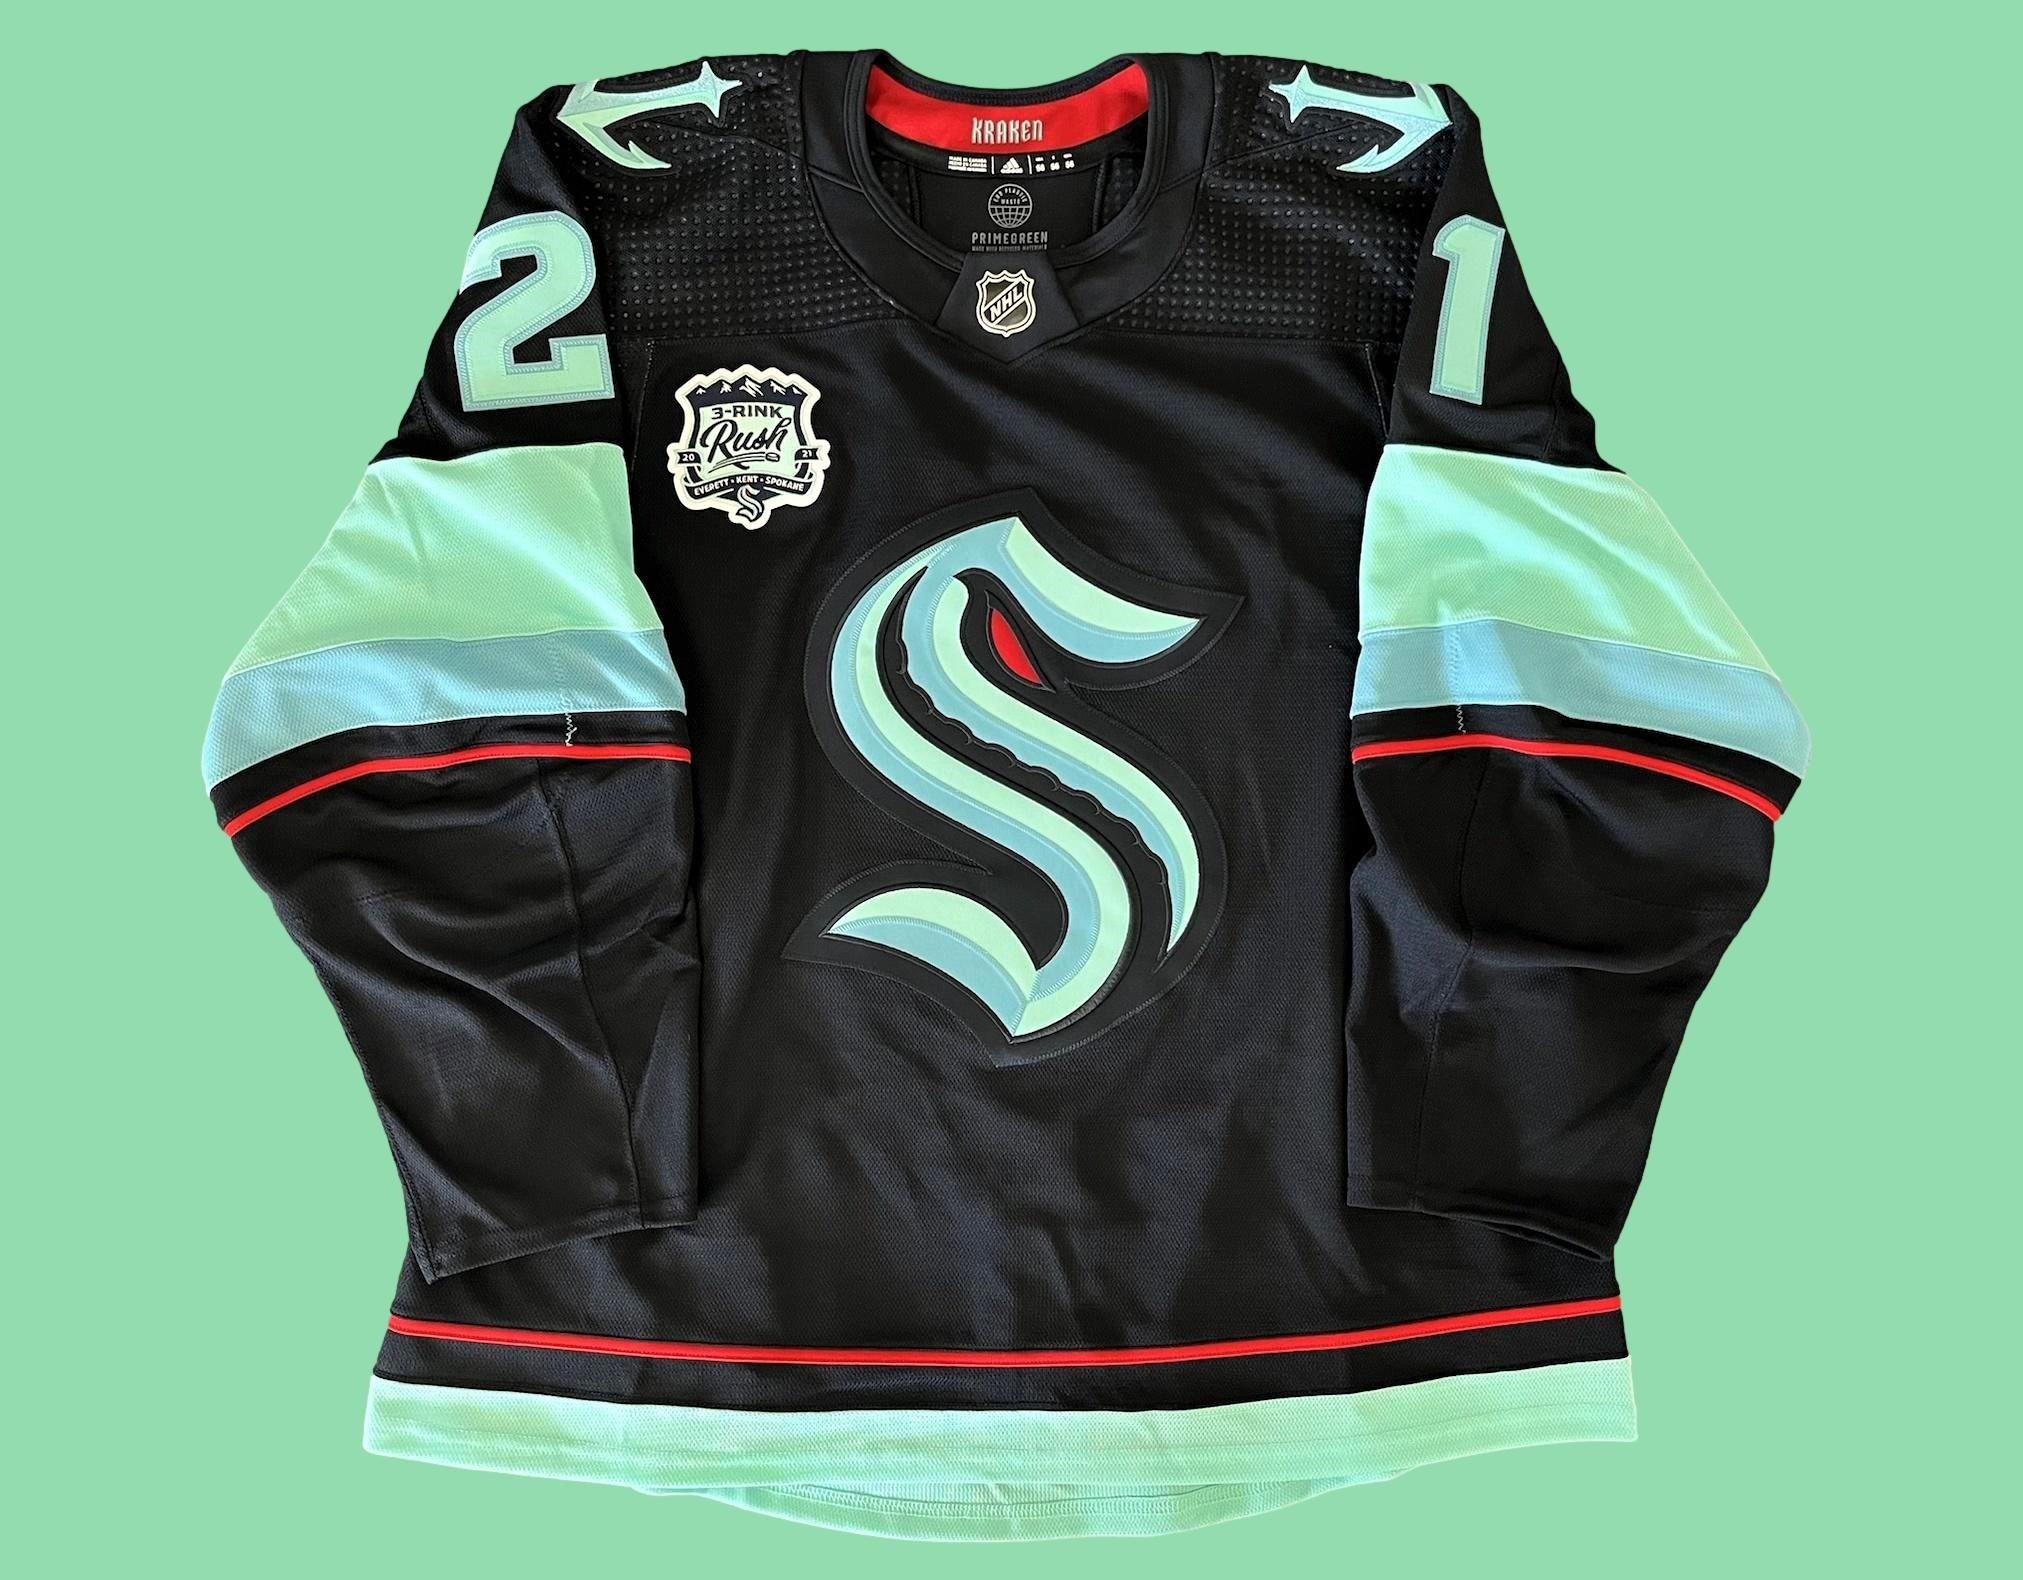 Pretty much the best Seattle Kraken jerseys i could come up with. Jerseys  style is not the same but atleast got all the colors in nicely. What do you  think? : r/EA_NHL